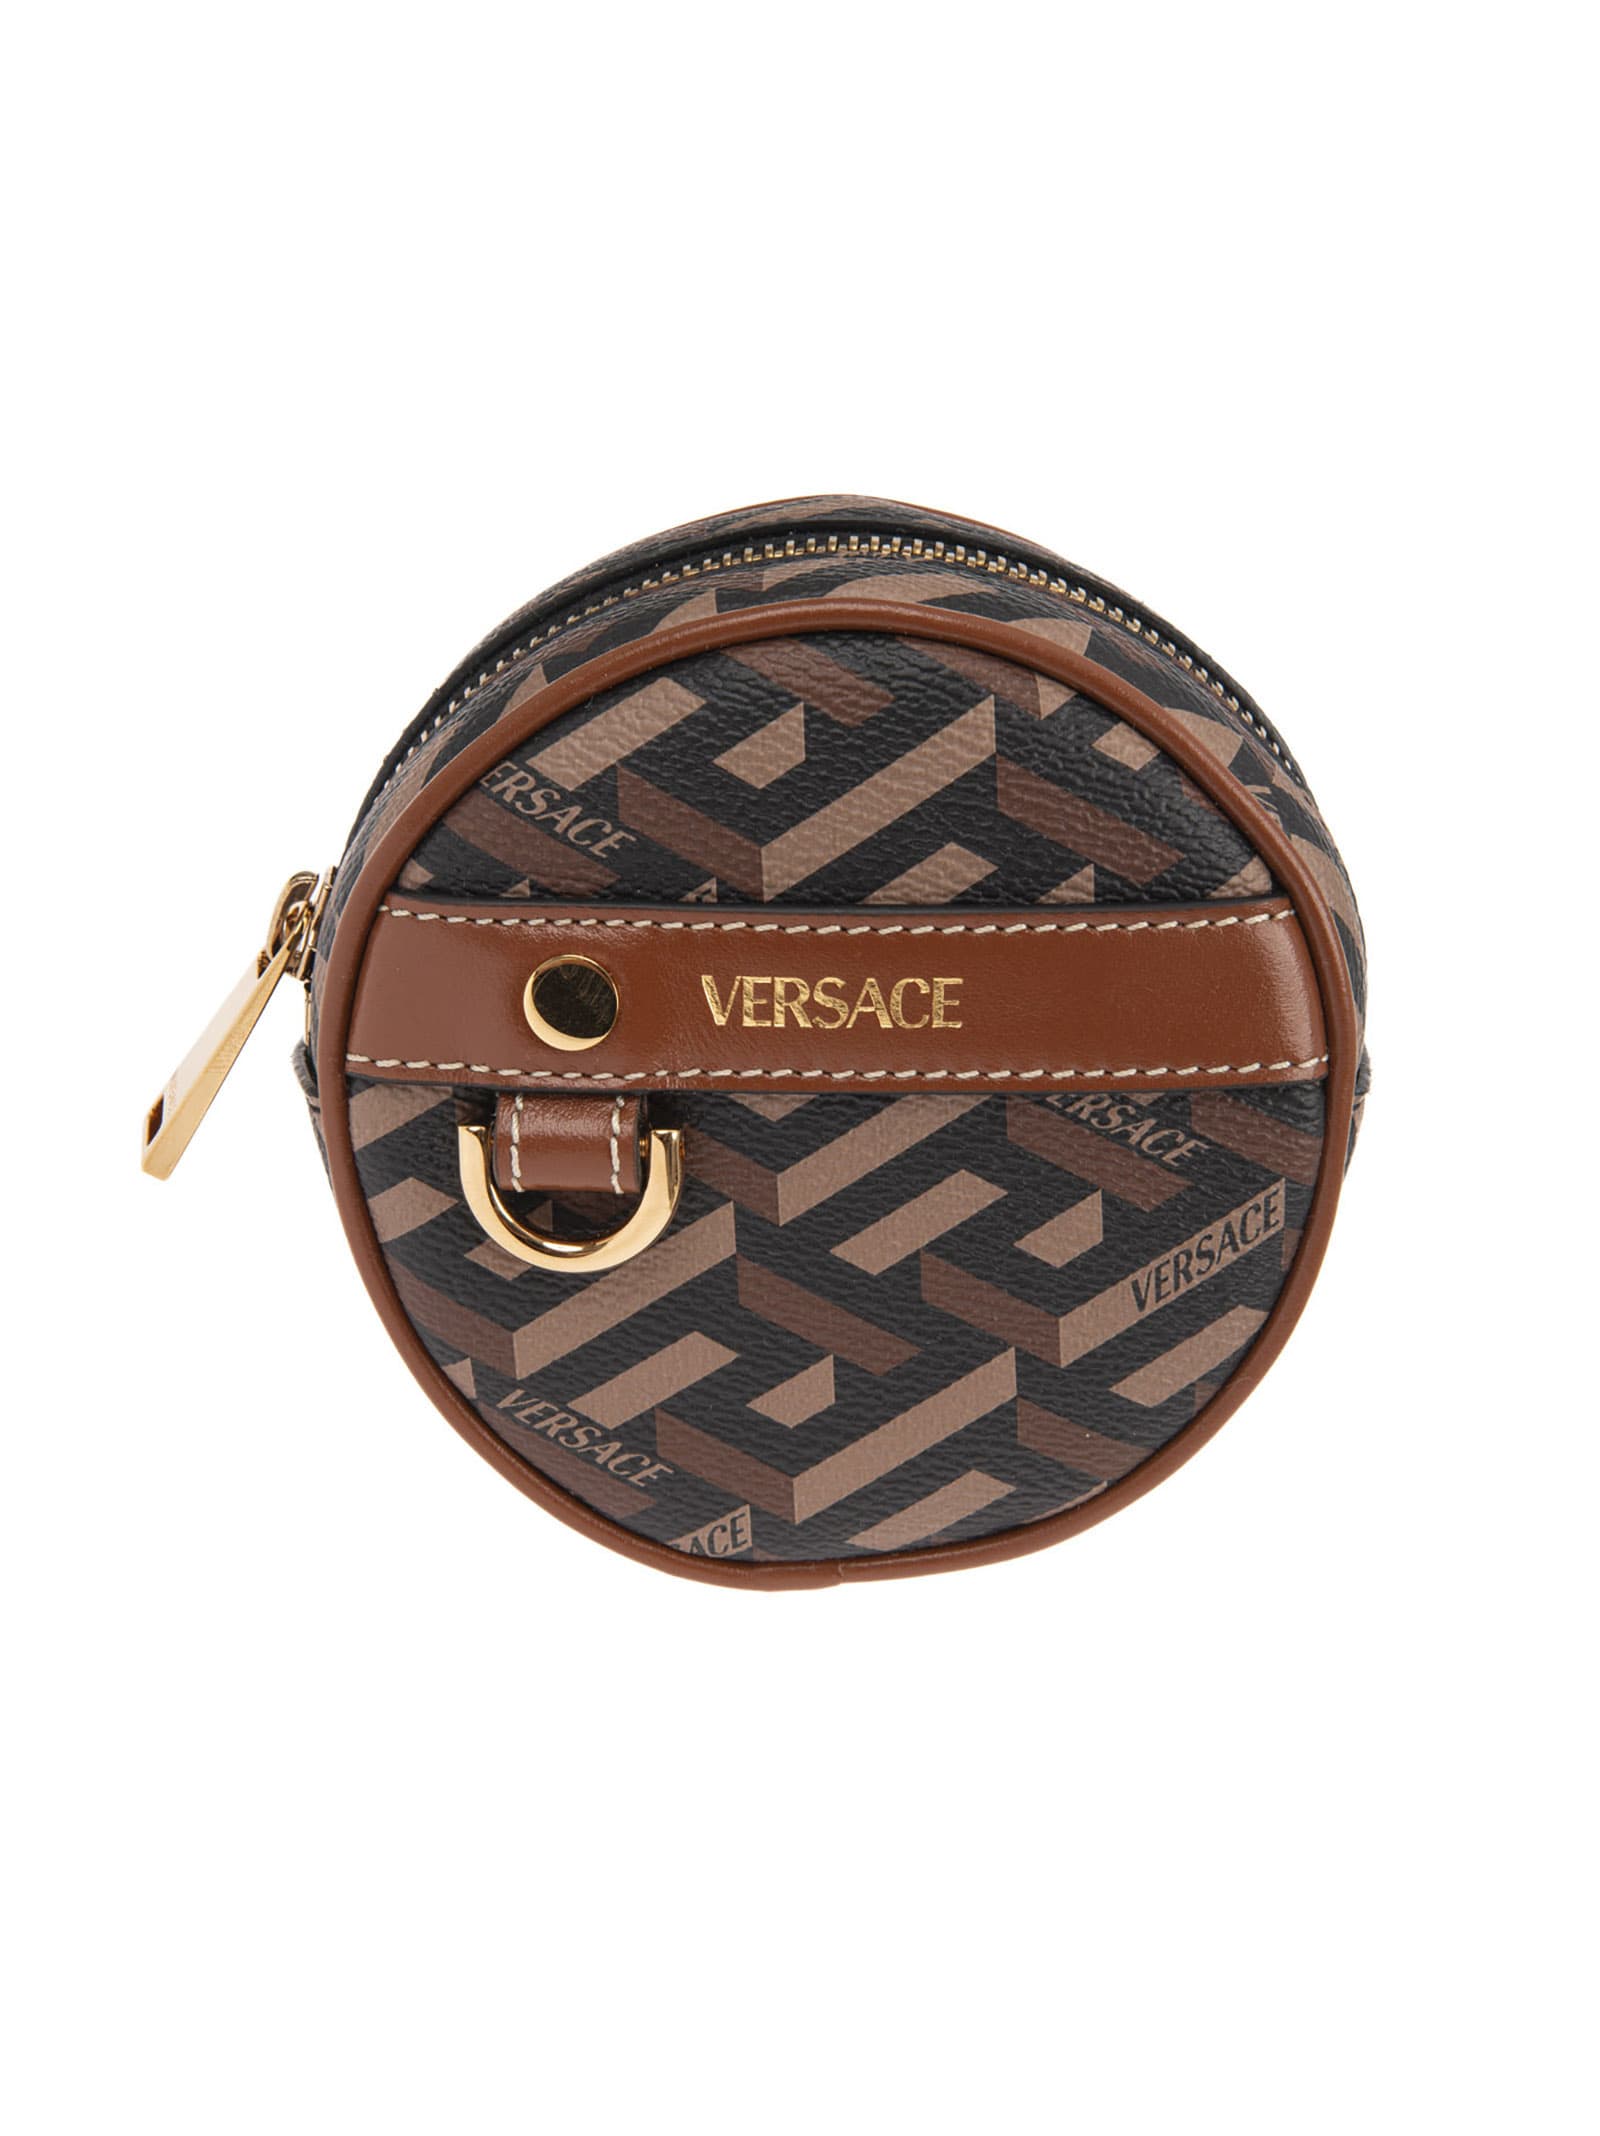 Versace Coated Canvas Pouch